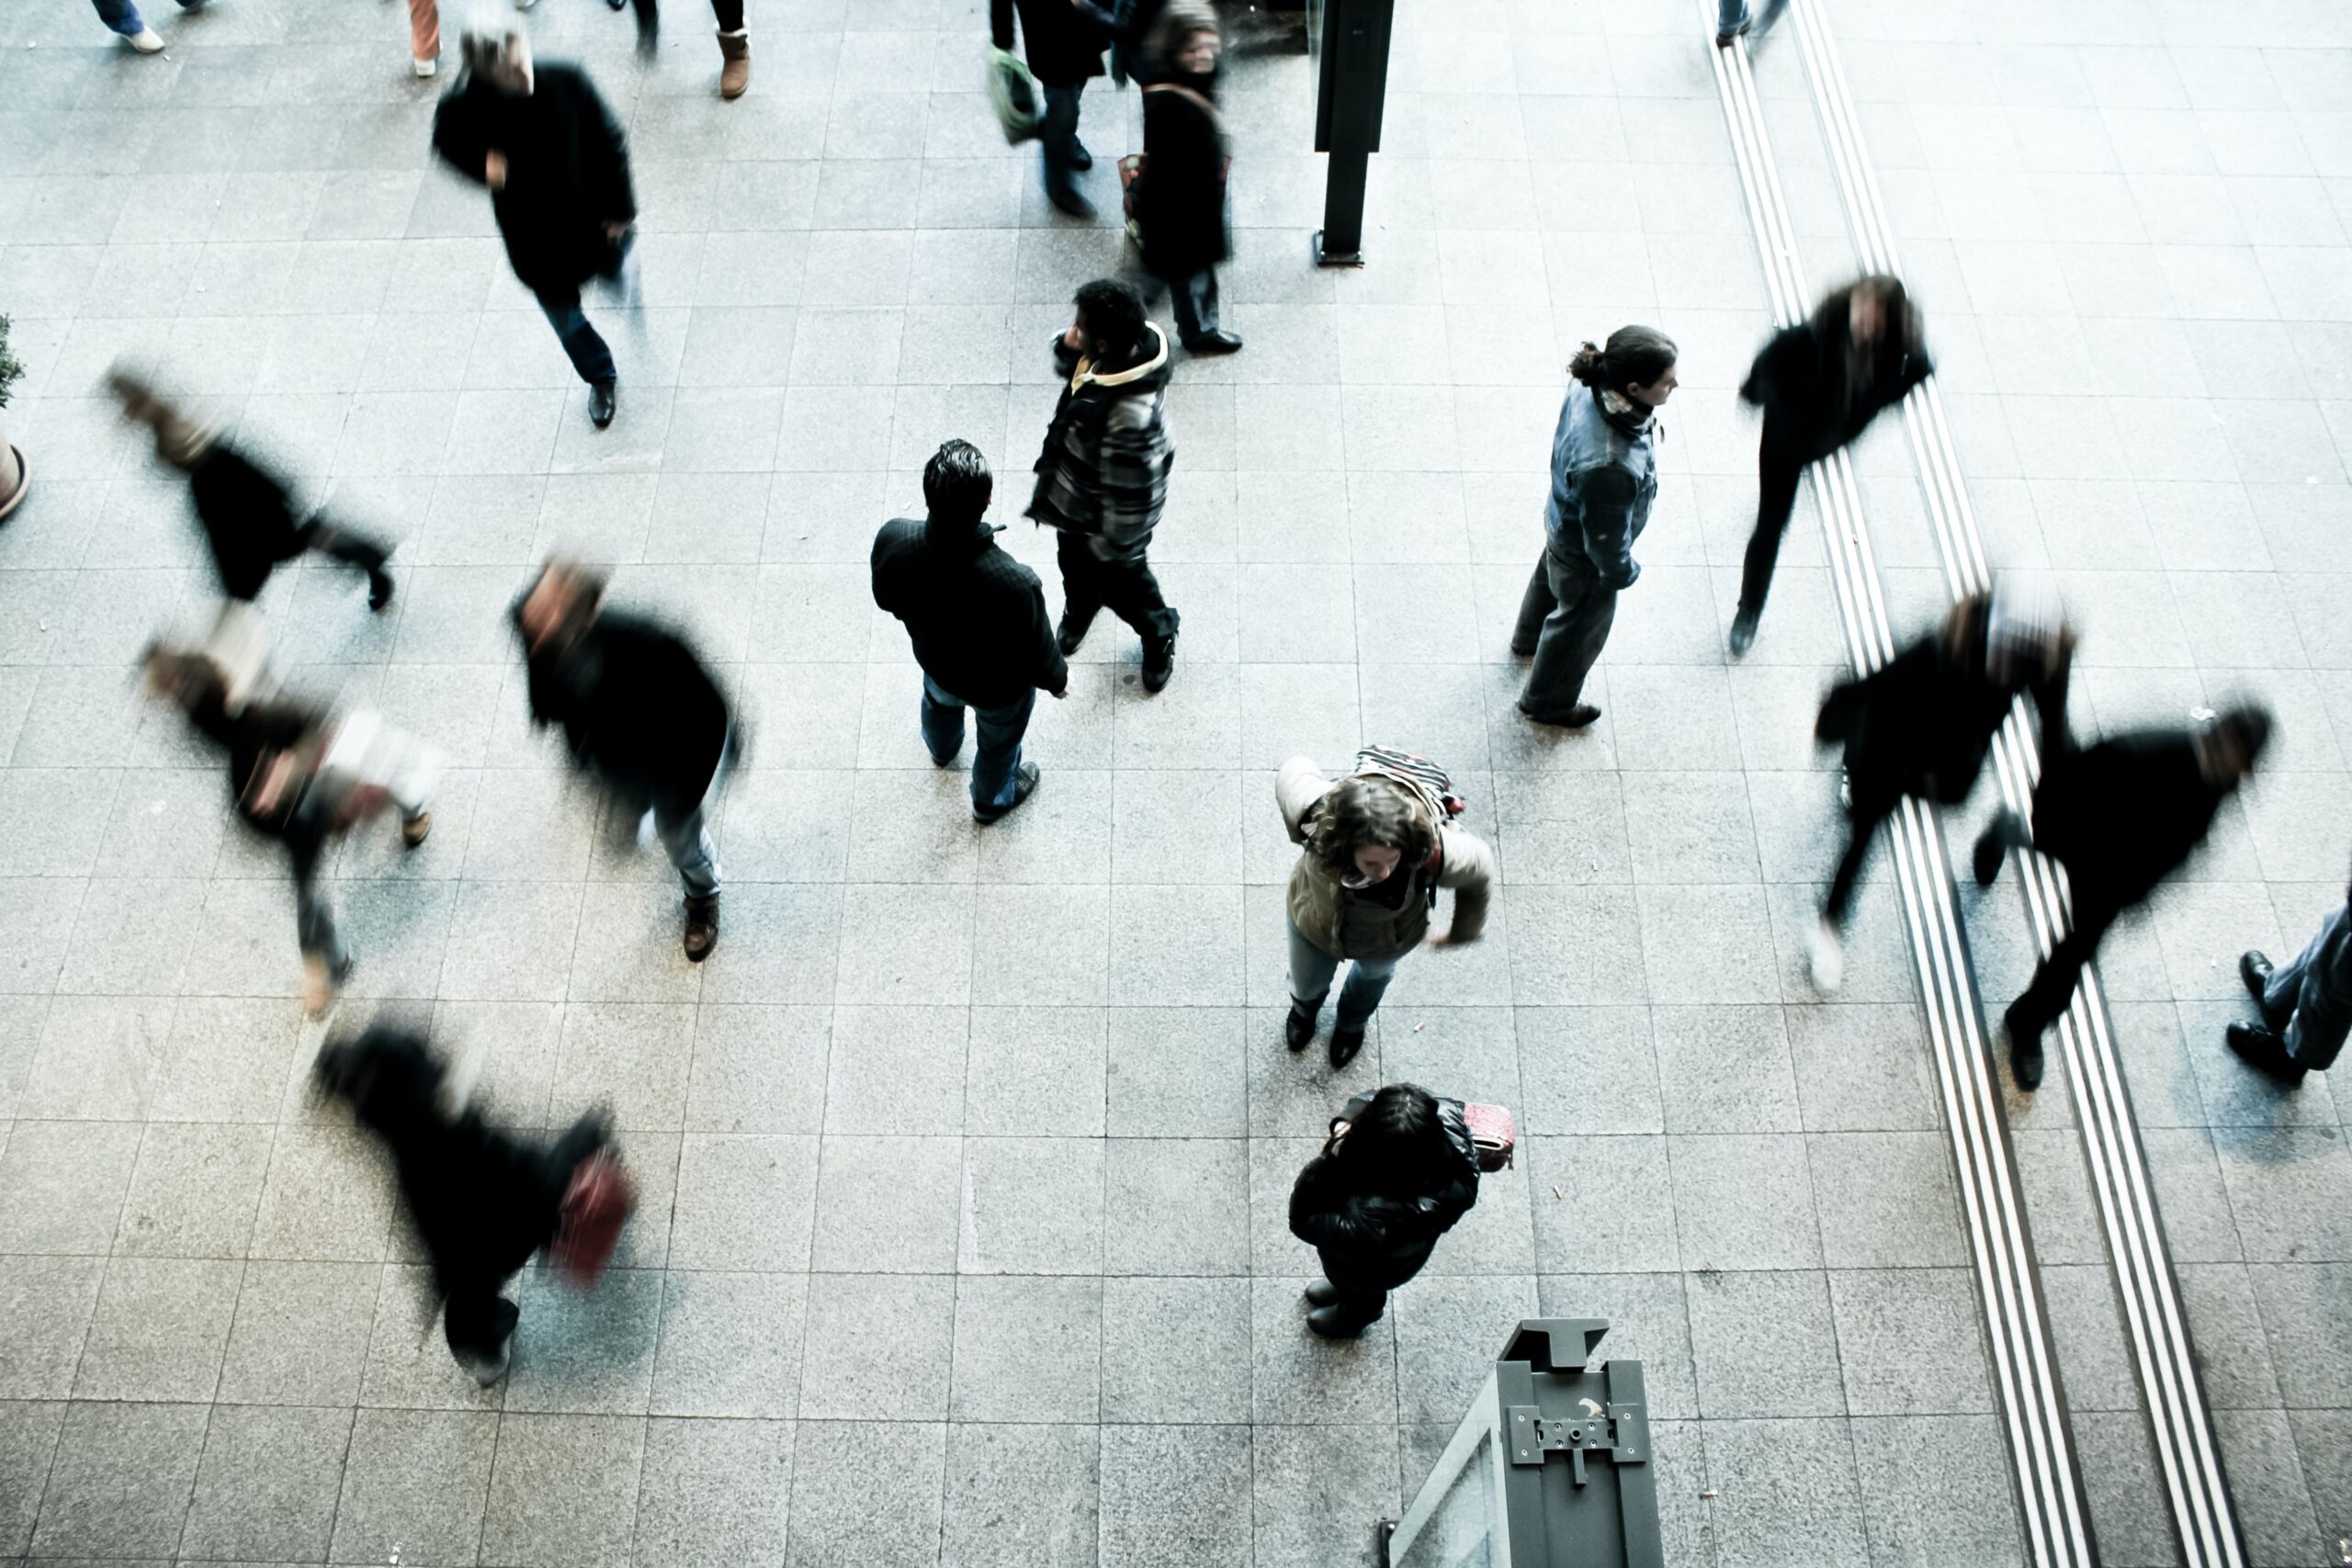 People walking in a public space, blurred by their movement.